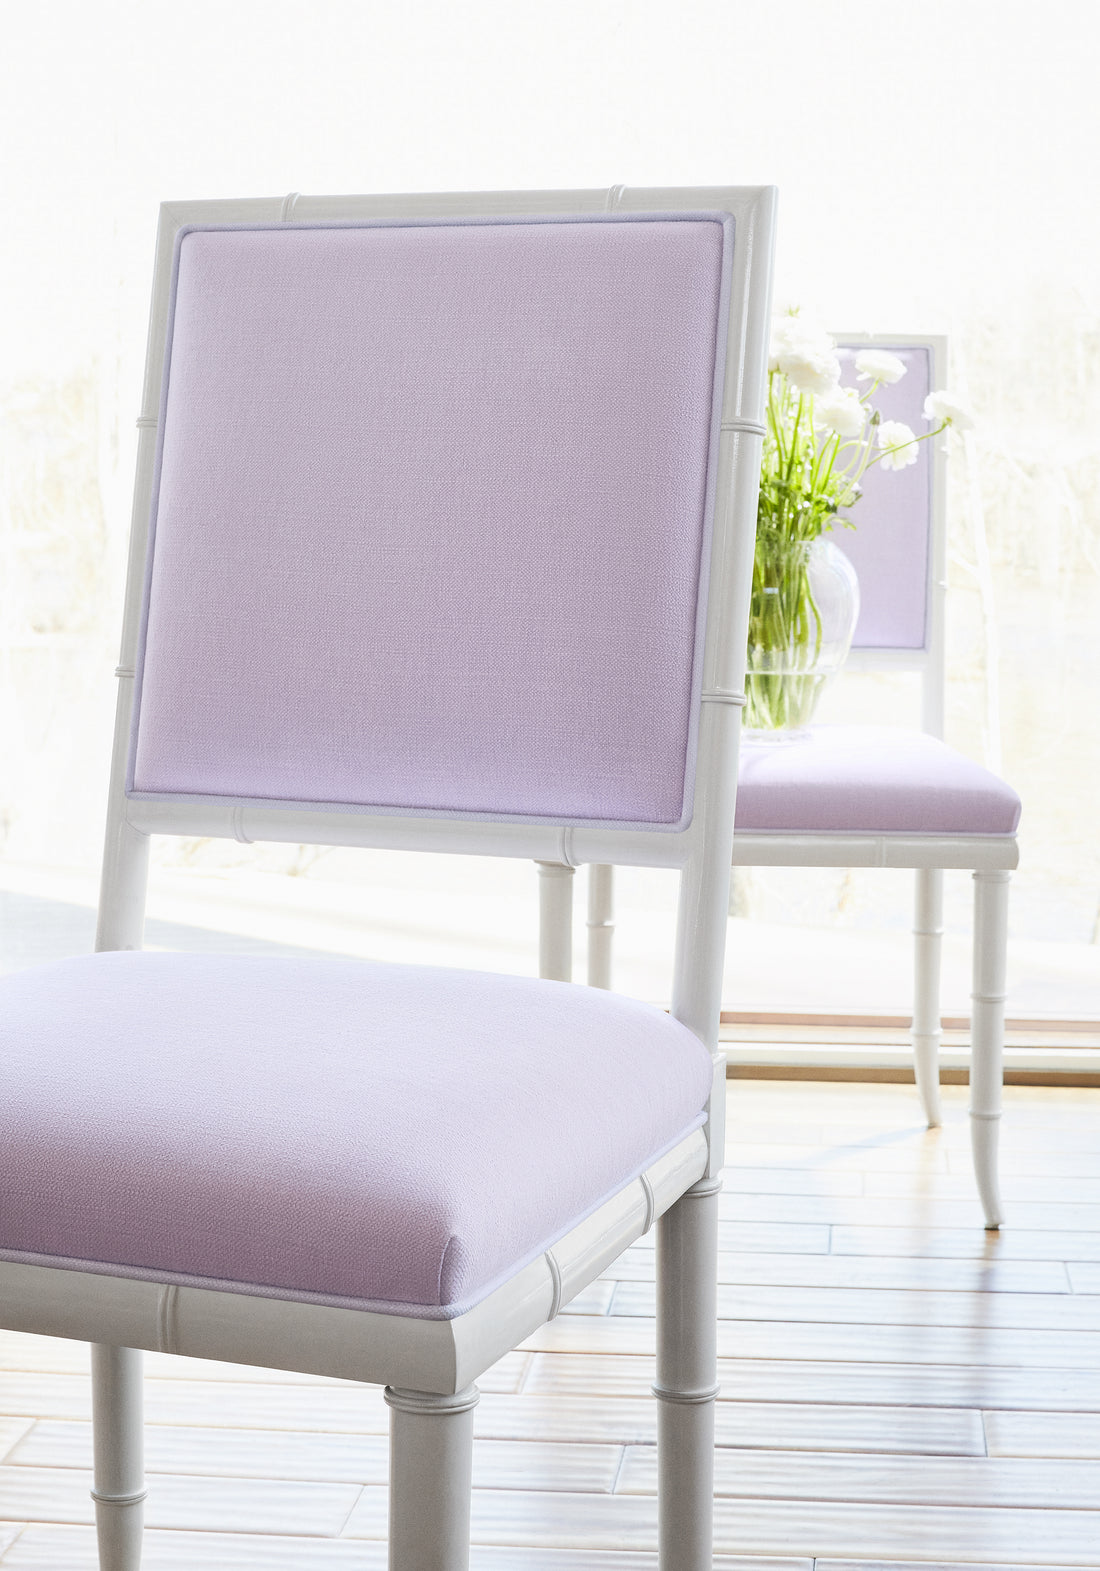 Darien Dining Chair in Prisma woven fabric in lilac color - pattern number W70135 - by Thibaut in the Woven Resource Vol 12 Prisma collection